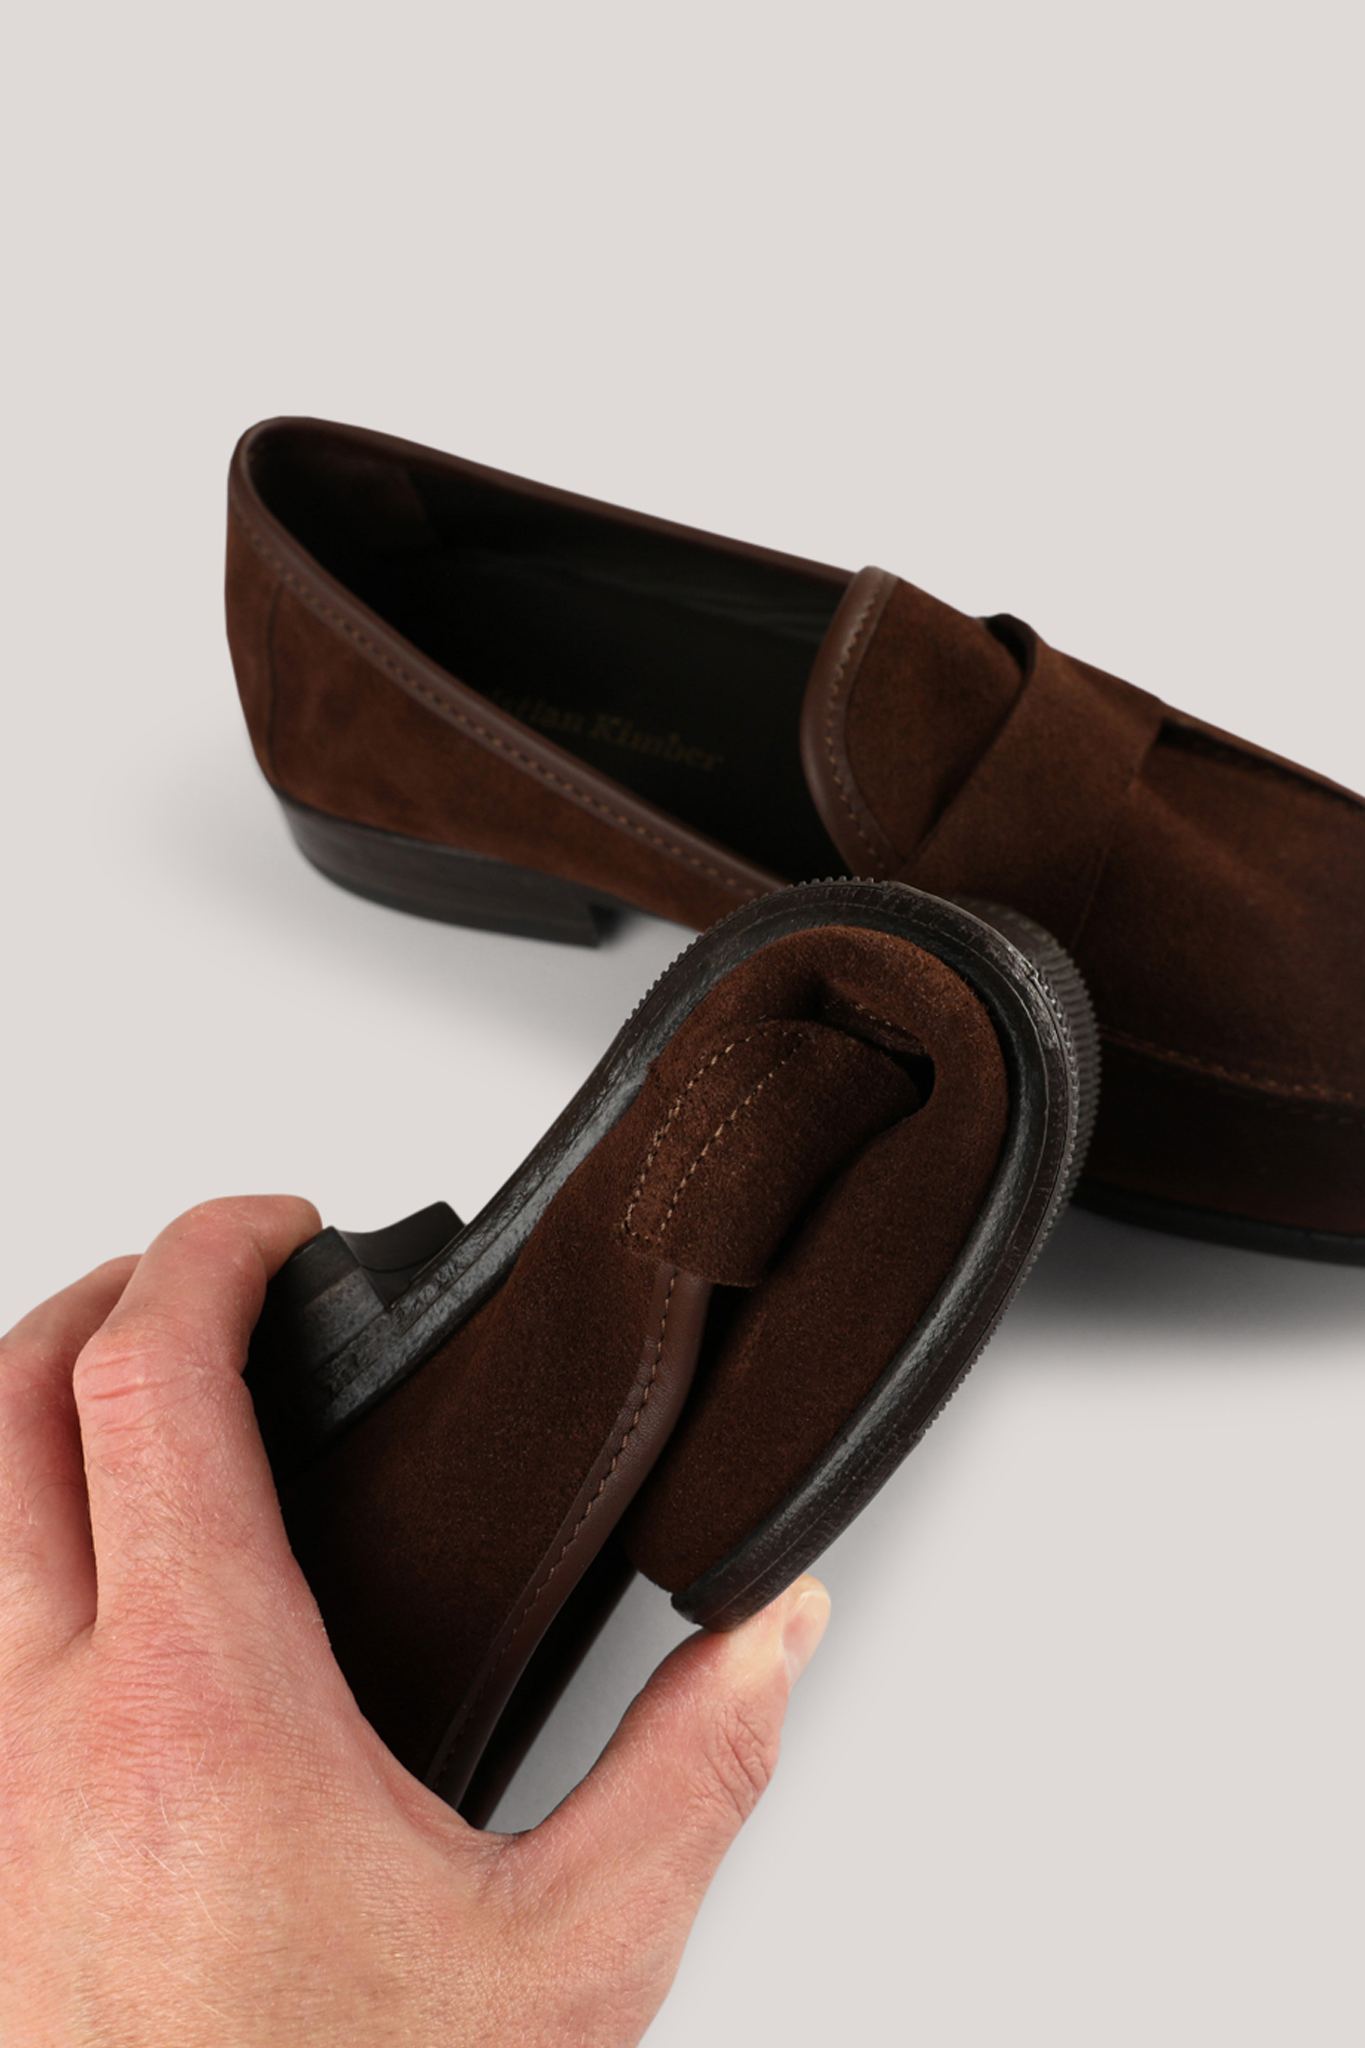 Gisborne Softy Loafer - Chocolate Suede